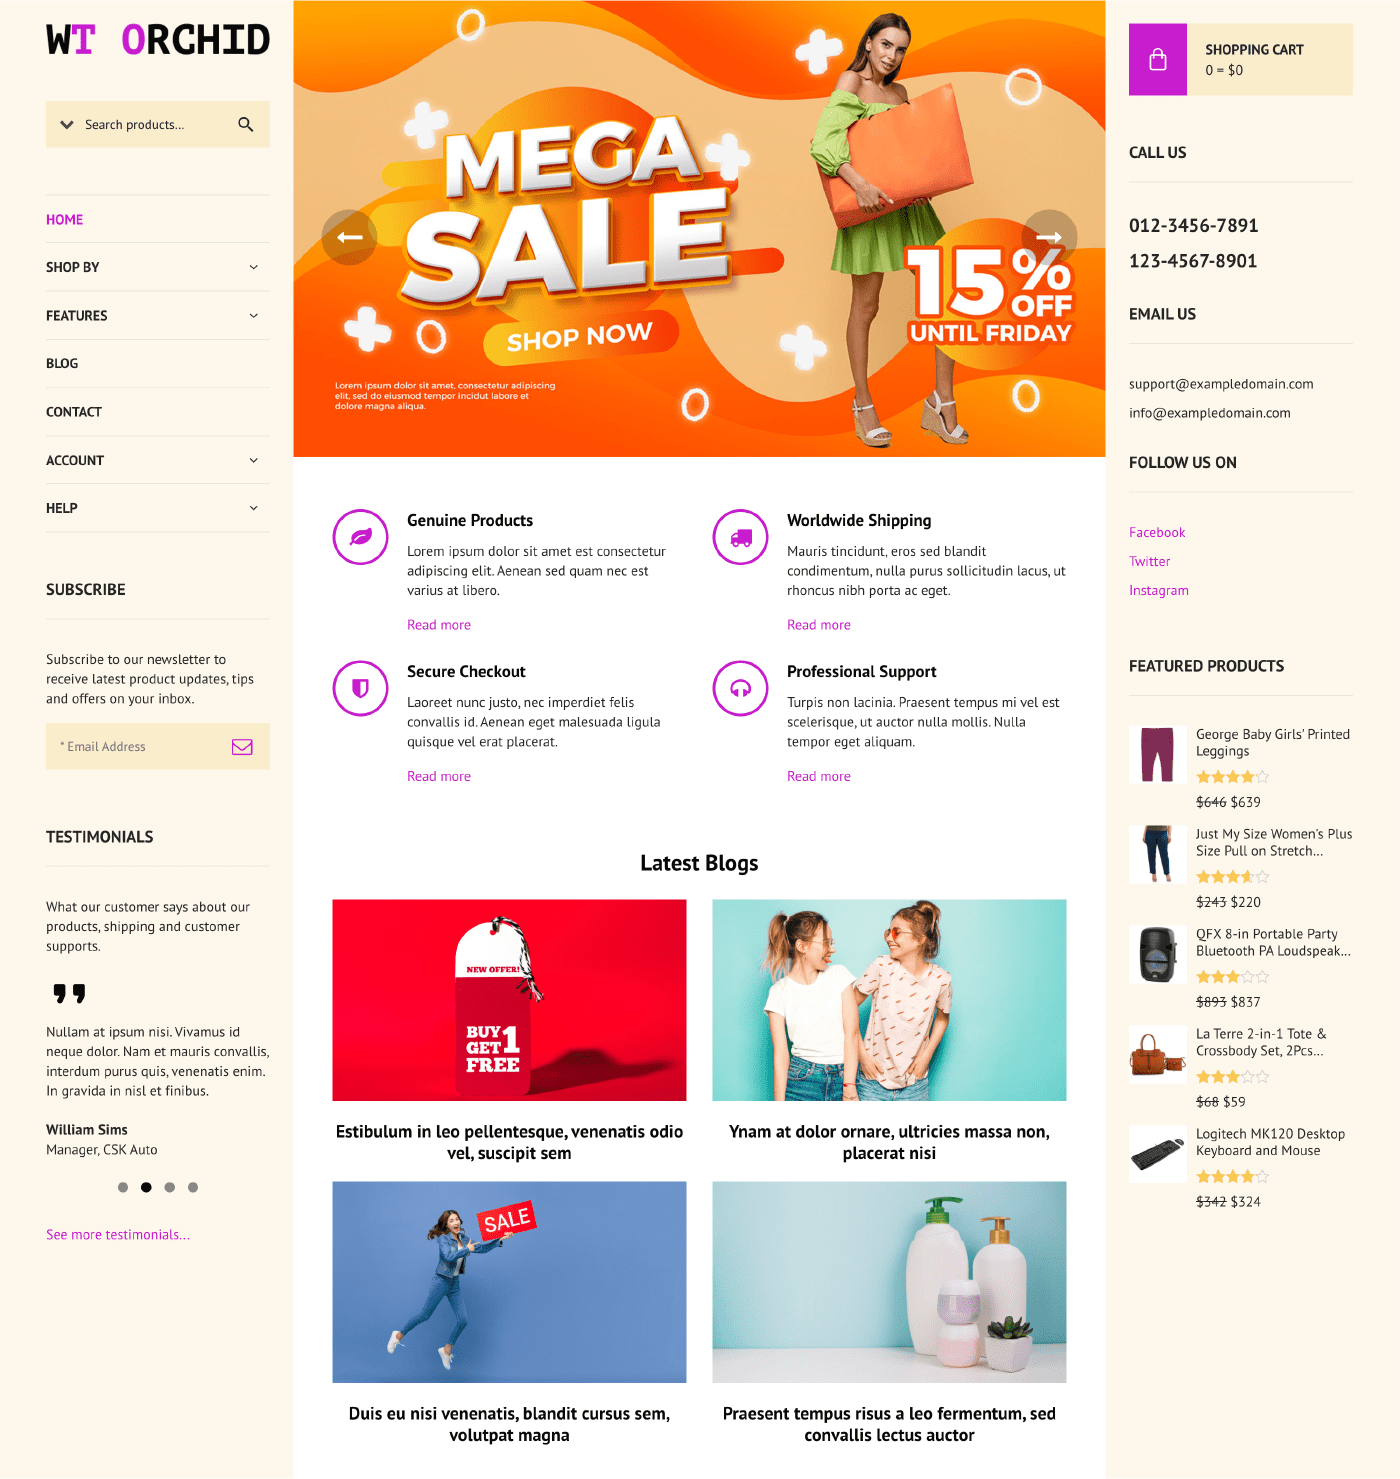 WT Orchid - WordPress for WooCommerce Theme